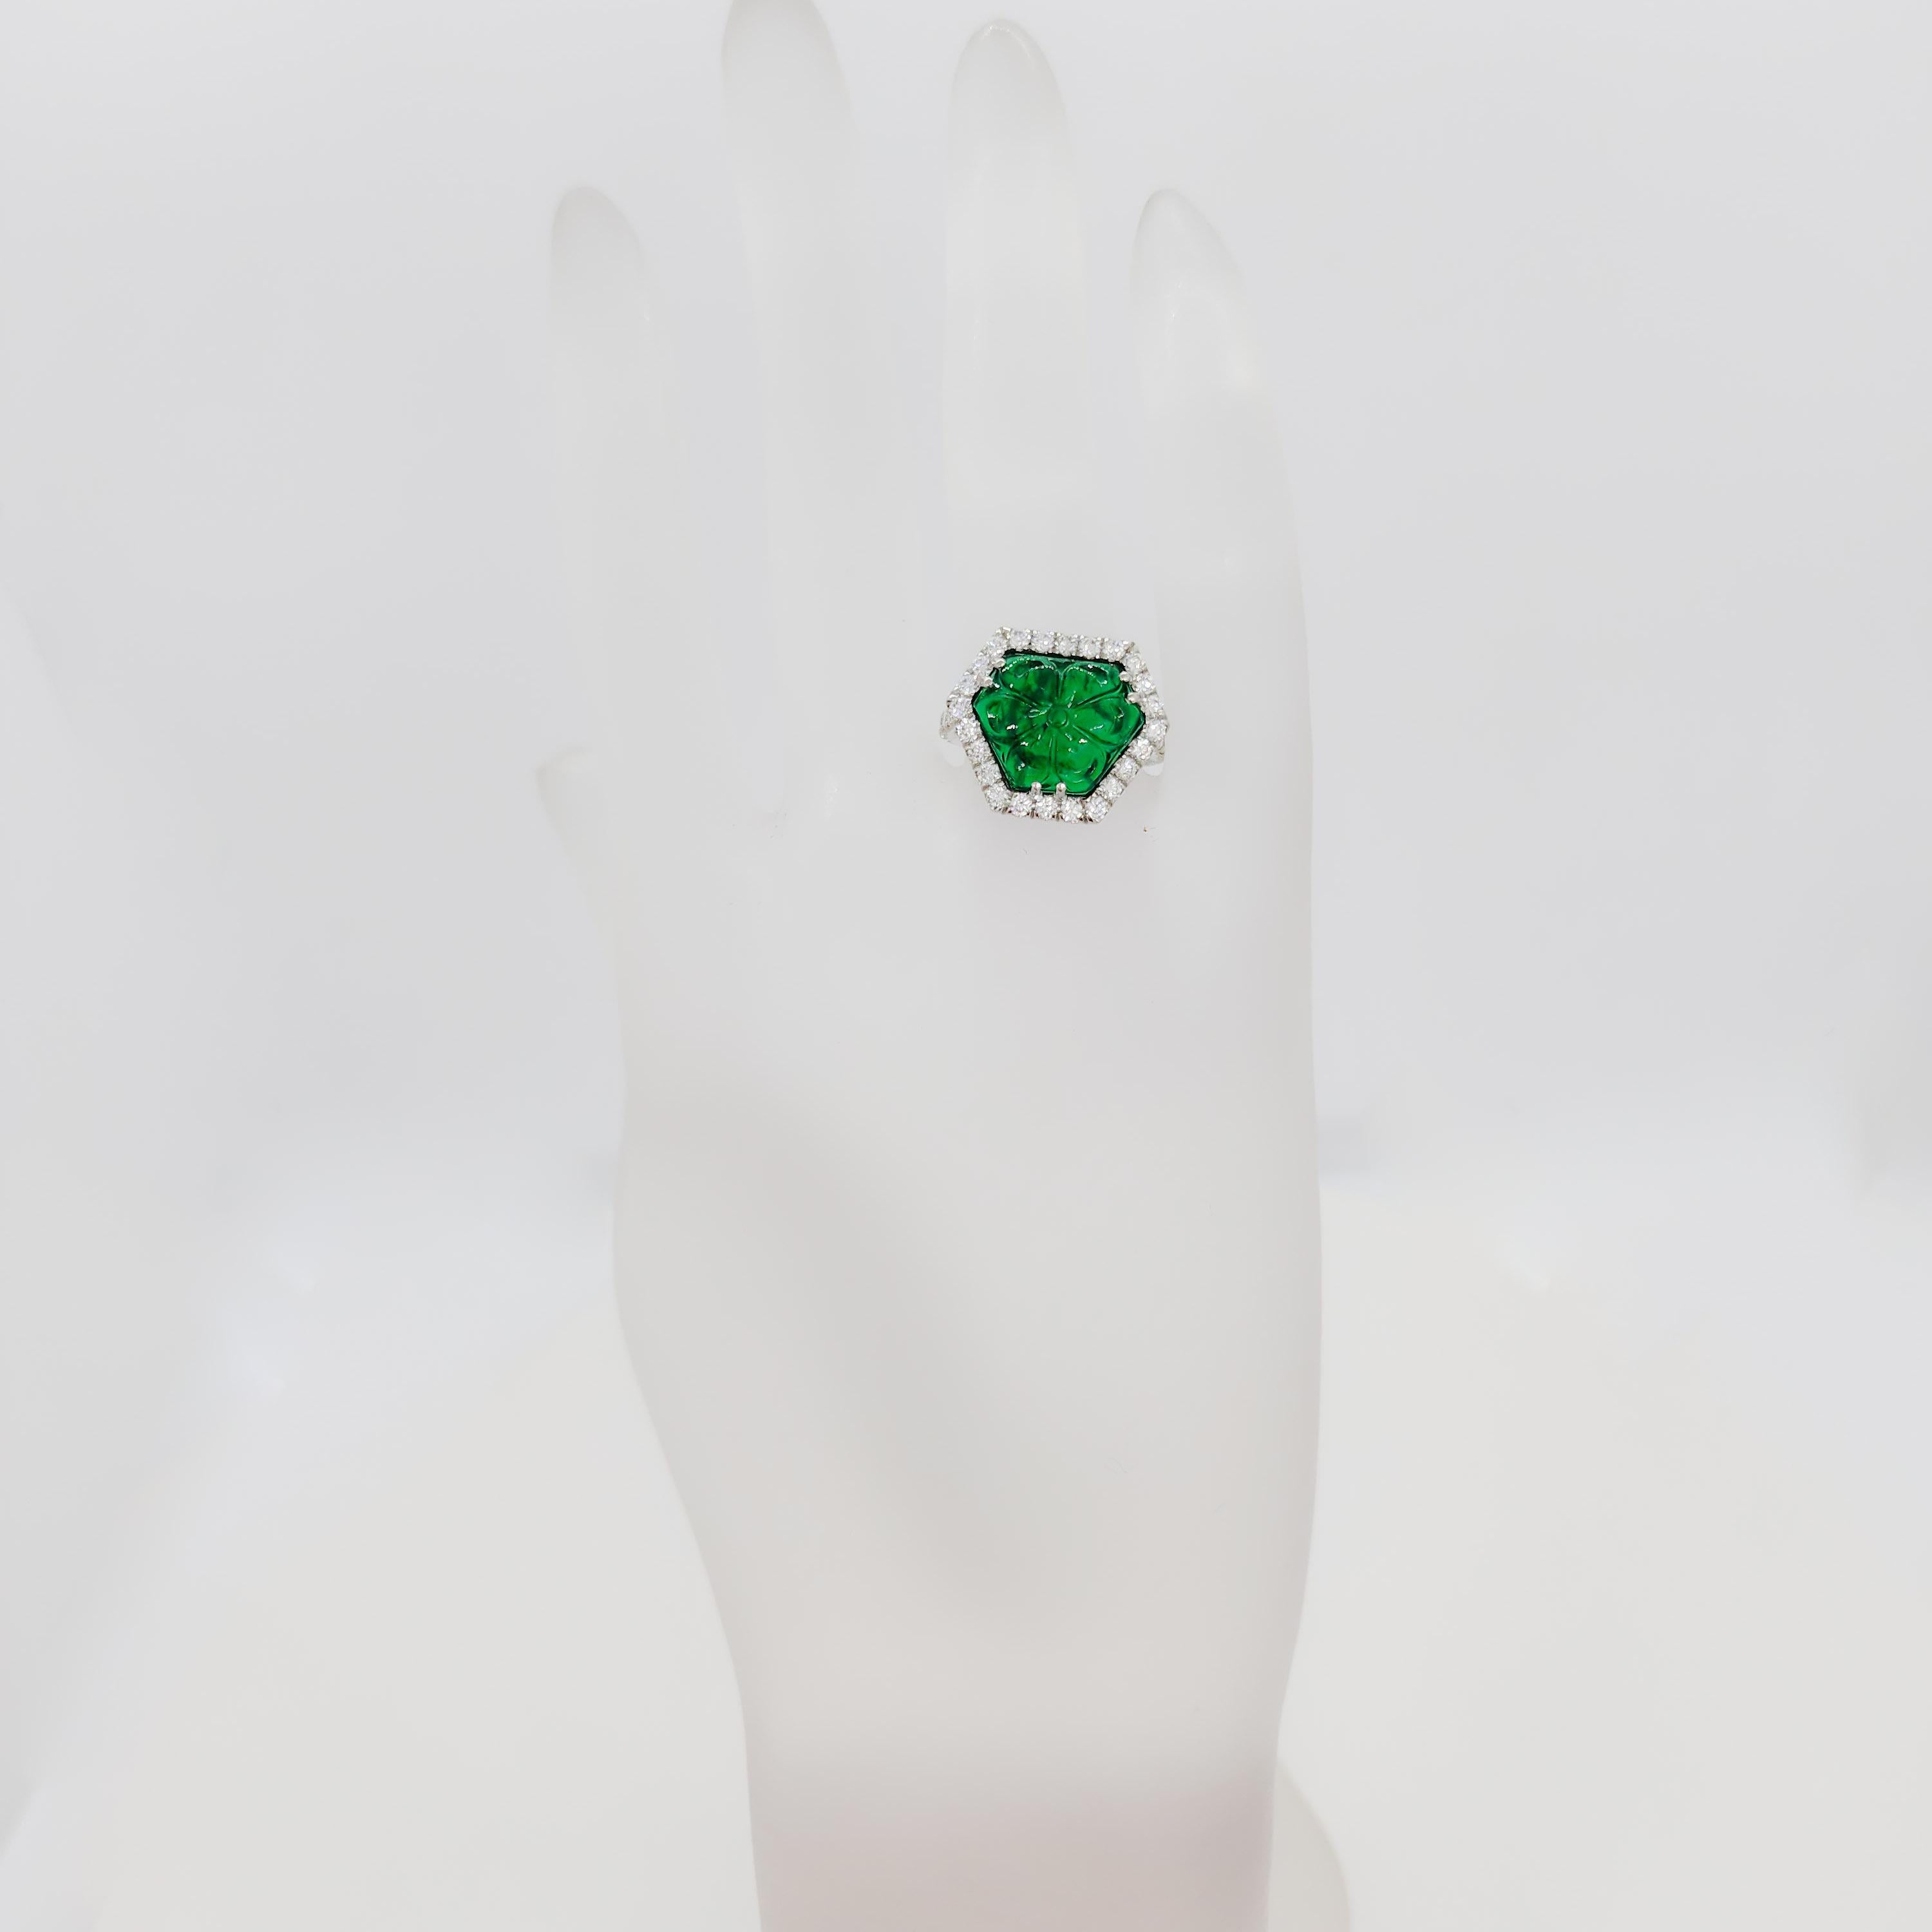 Beautiful 5.69 ct. carved emerald fancy shape stone with 0.95 ct. good quality white diamond rounds.  Handmade in platinum.  Ring size 6.75.